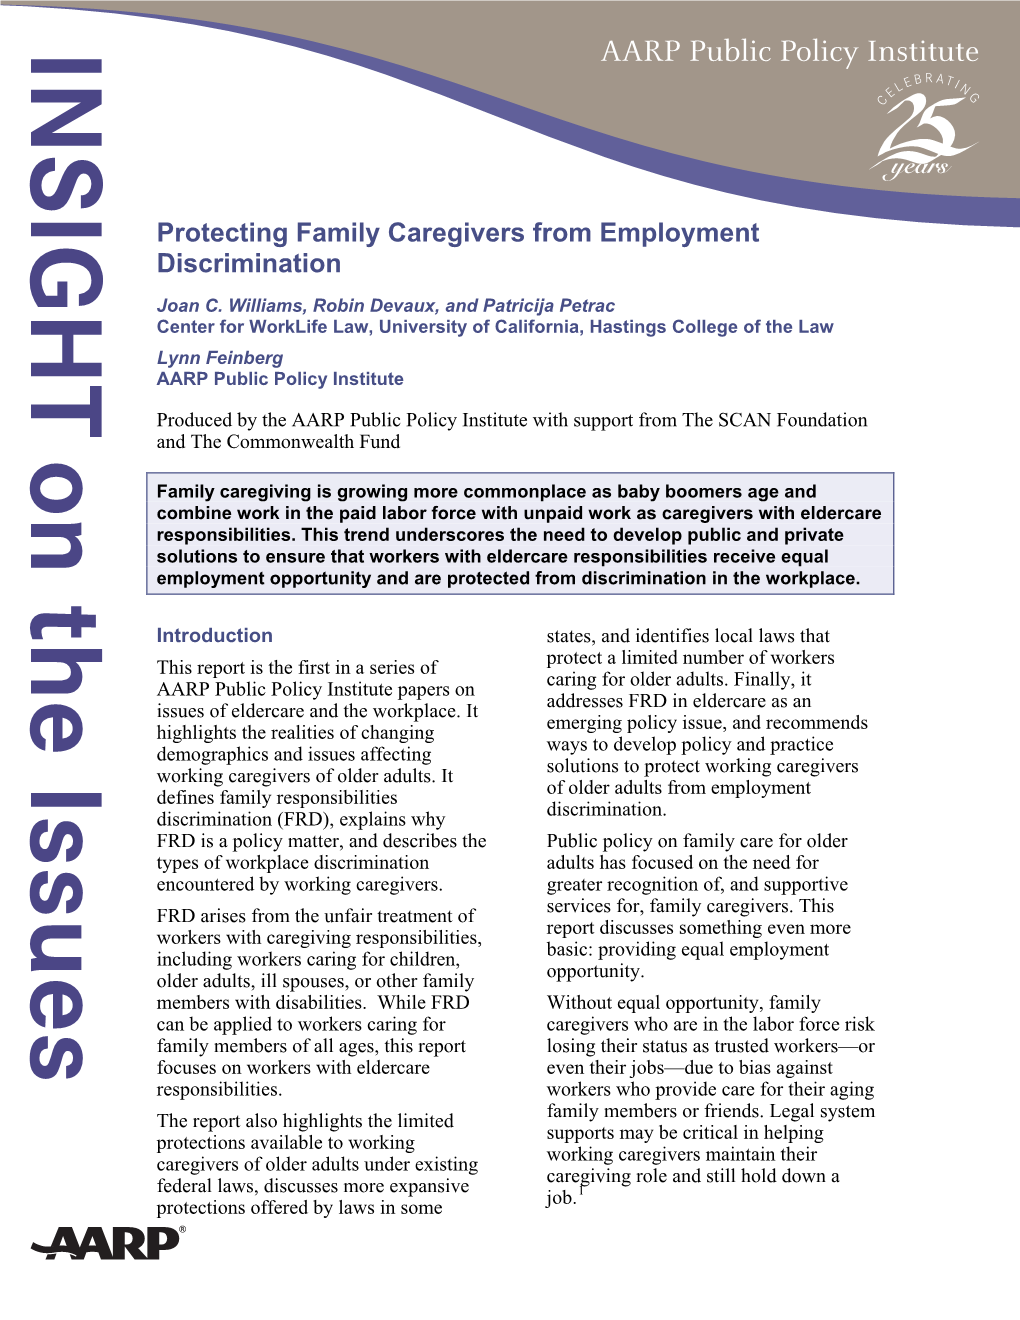 Protecting Family Caregivers from Employment Discrimination